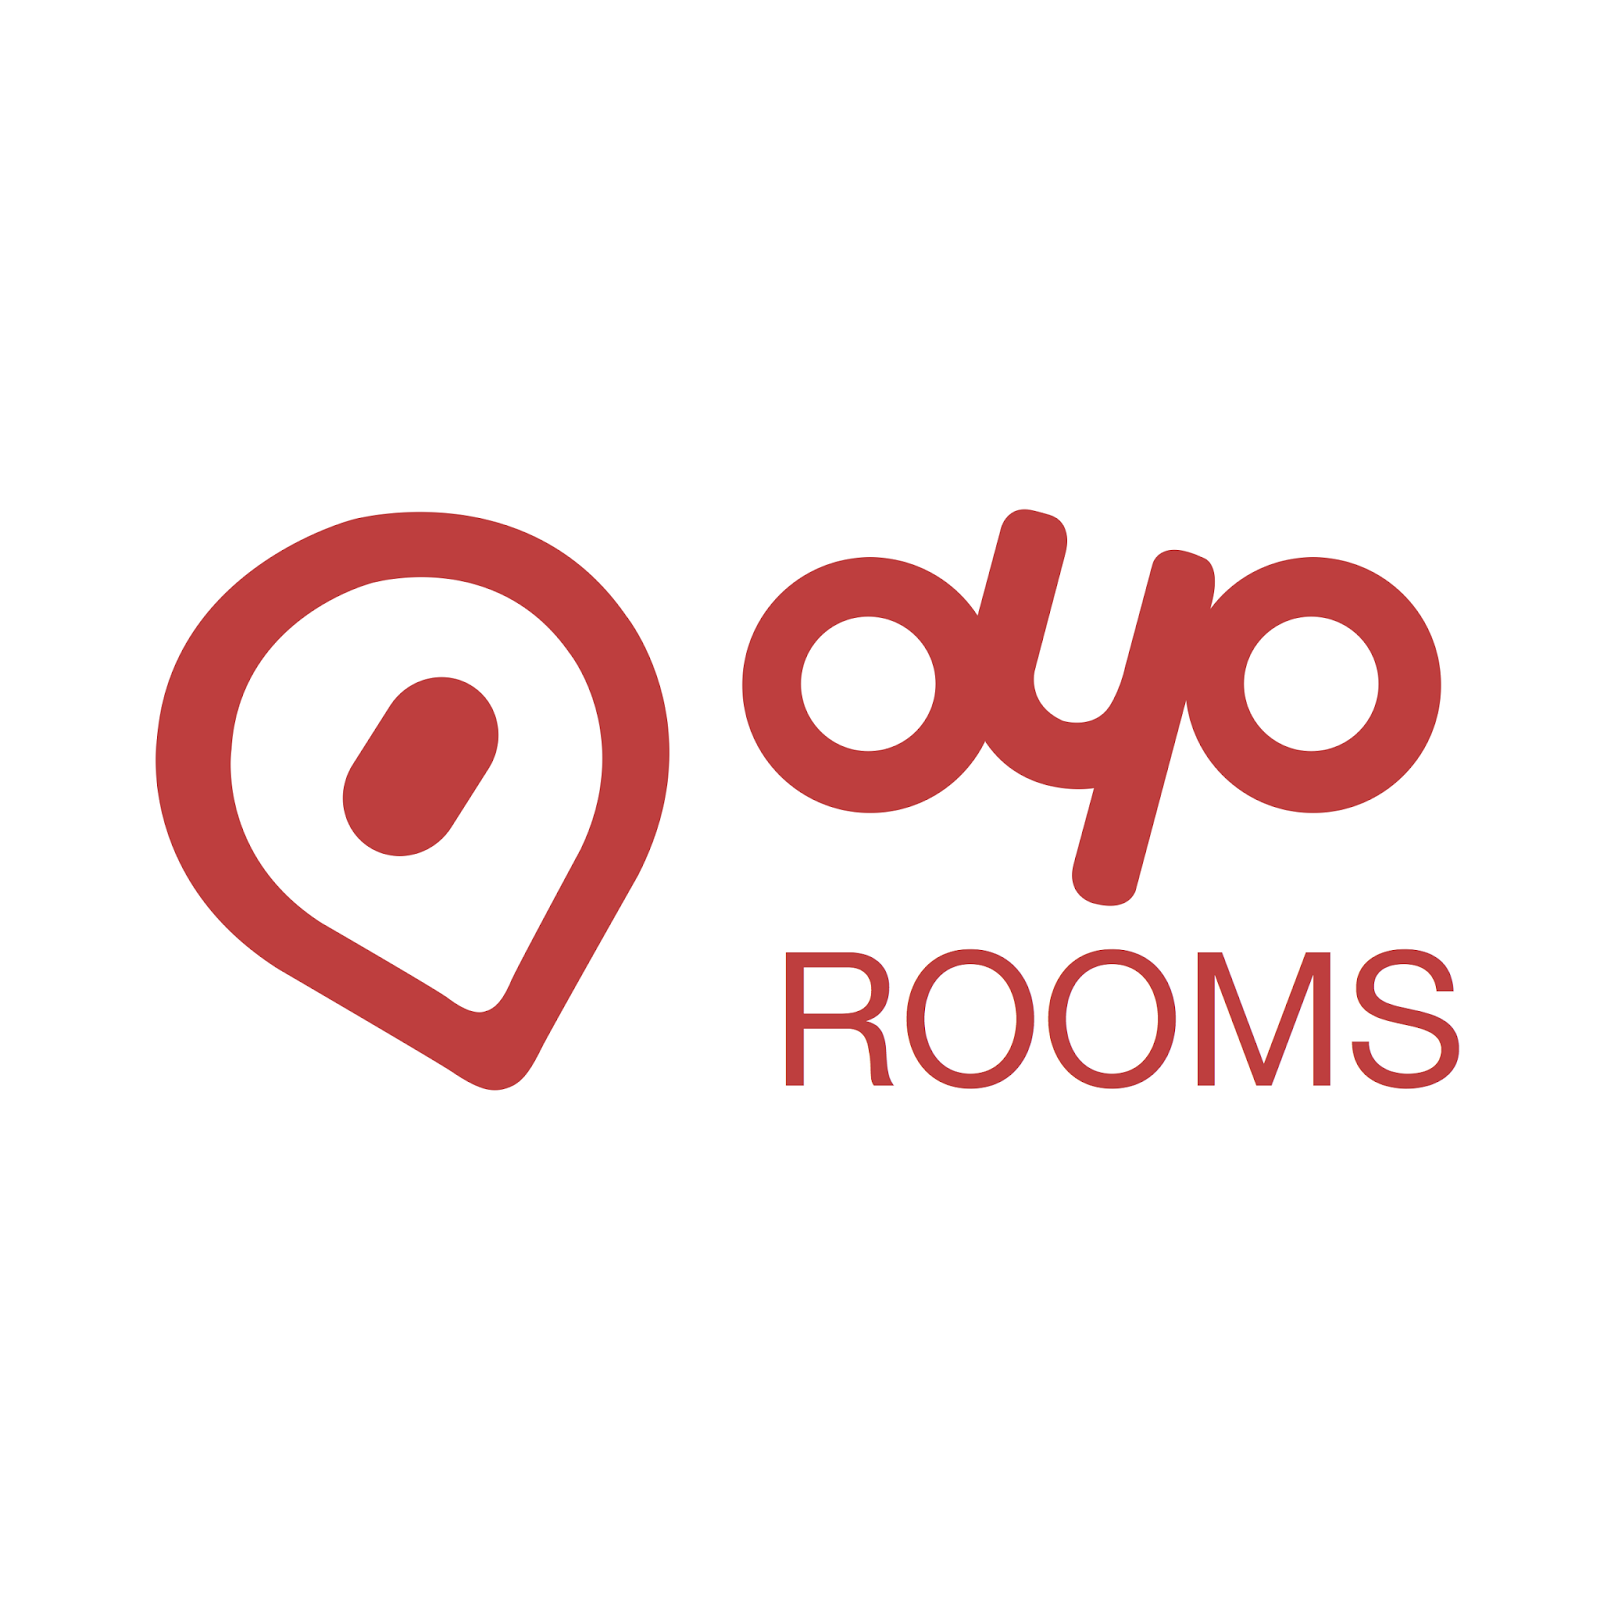 oyo rooms is a branded network of hotels in india oyo rooms currently ...